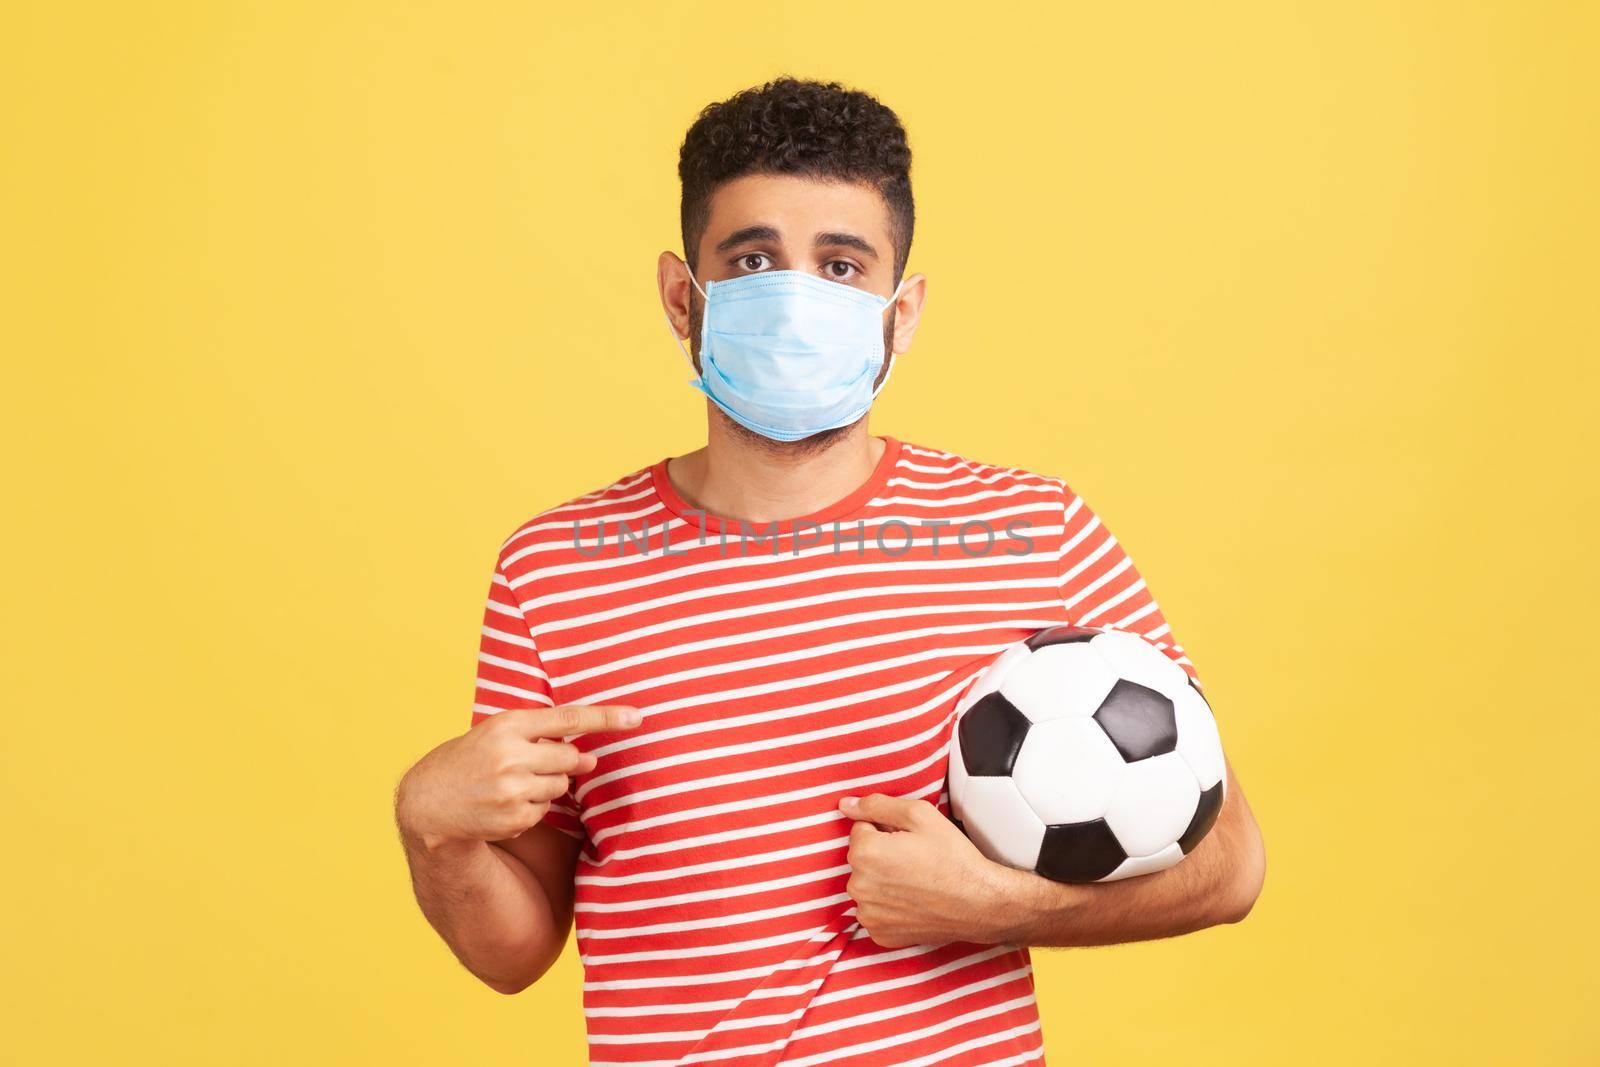 Young bearded man in safety mask and red t-shirt pointing finger at soccer ball on his hand with sad expression, coronavirus quarantine. Indoor studio shot isolated on yellow background